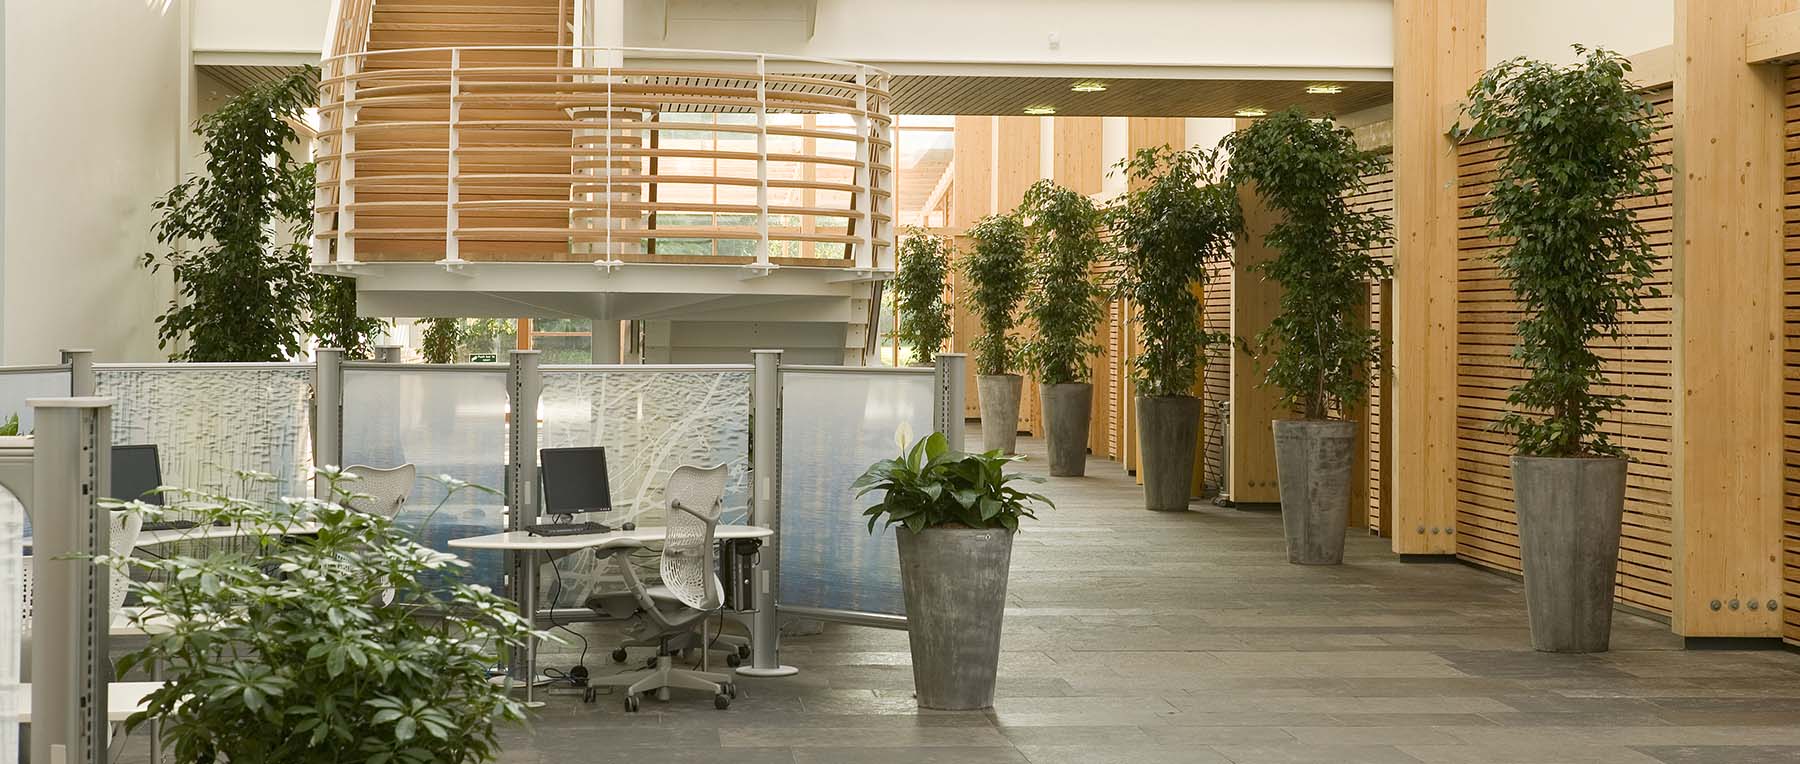 Bright, airy office atrium space with several large Enviroculture Ficus trees in grey stone effect eco-friendly planters